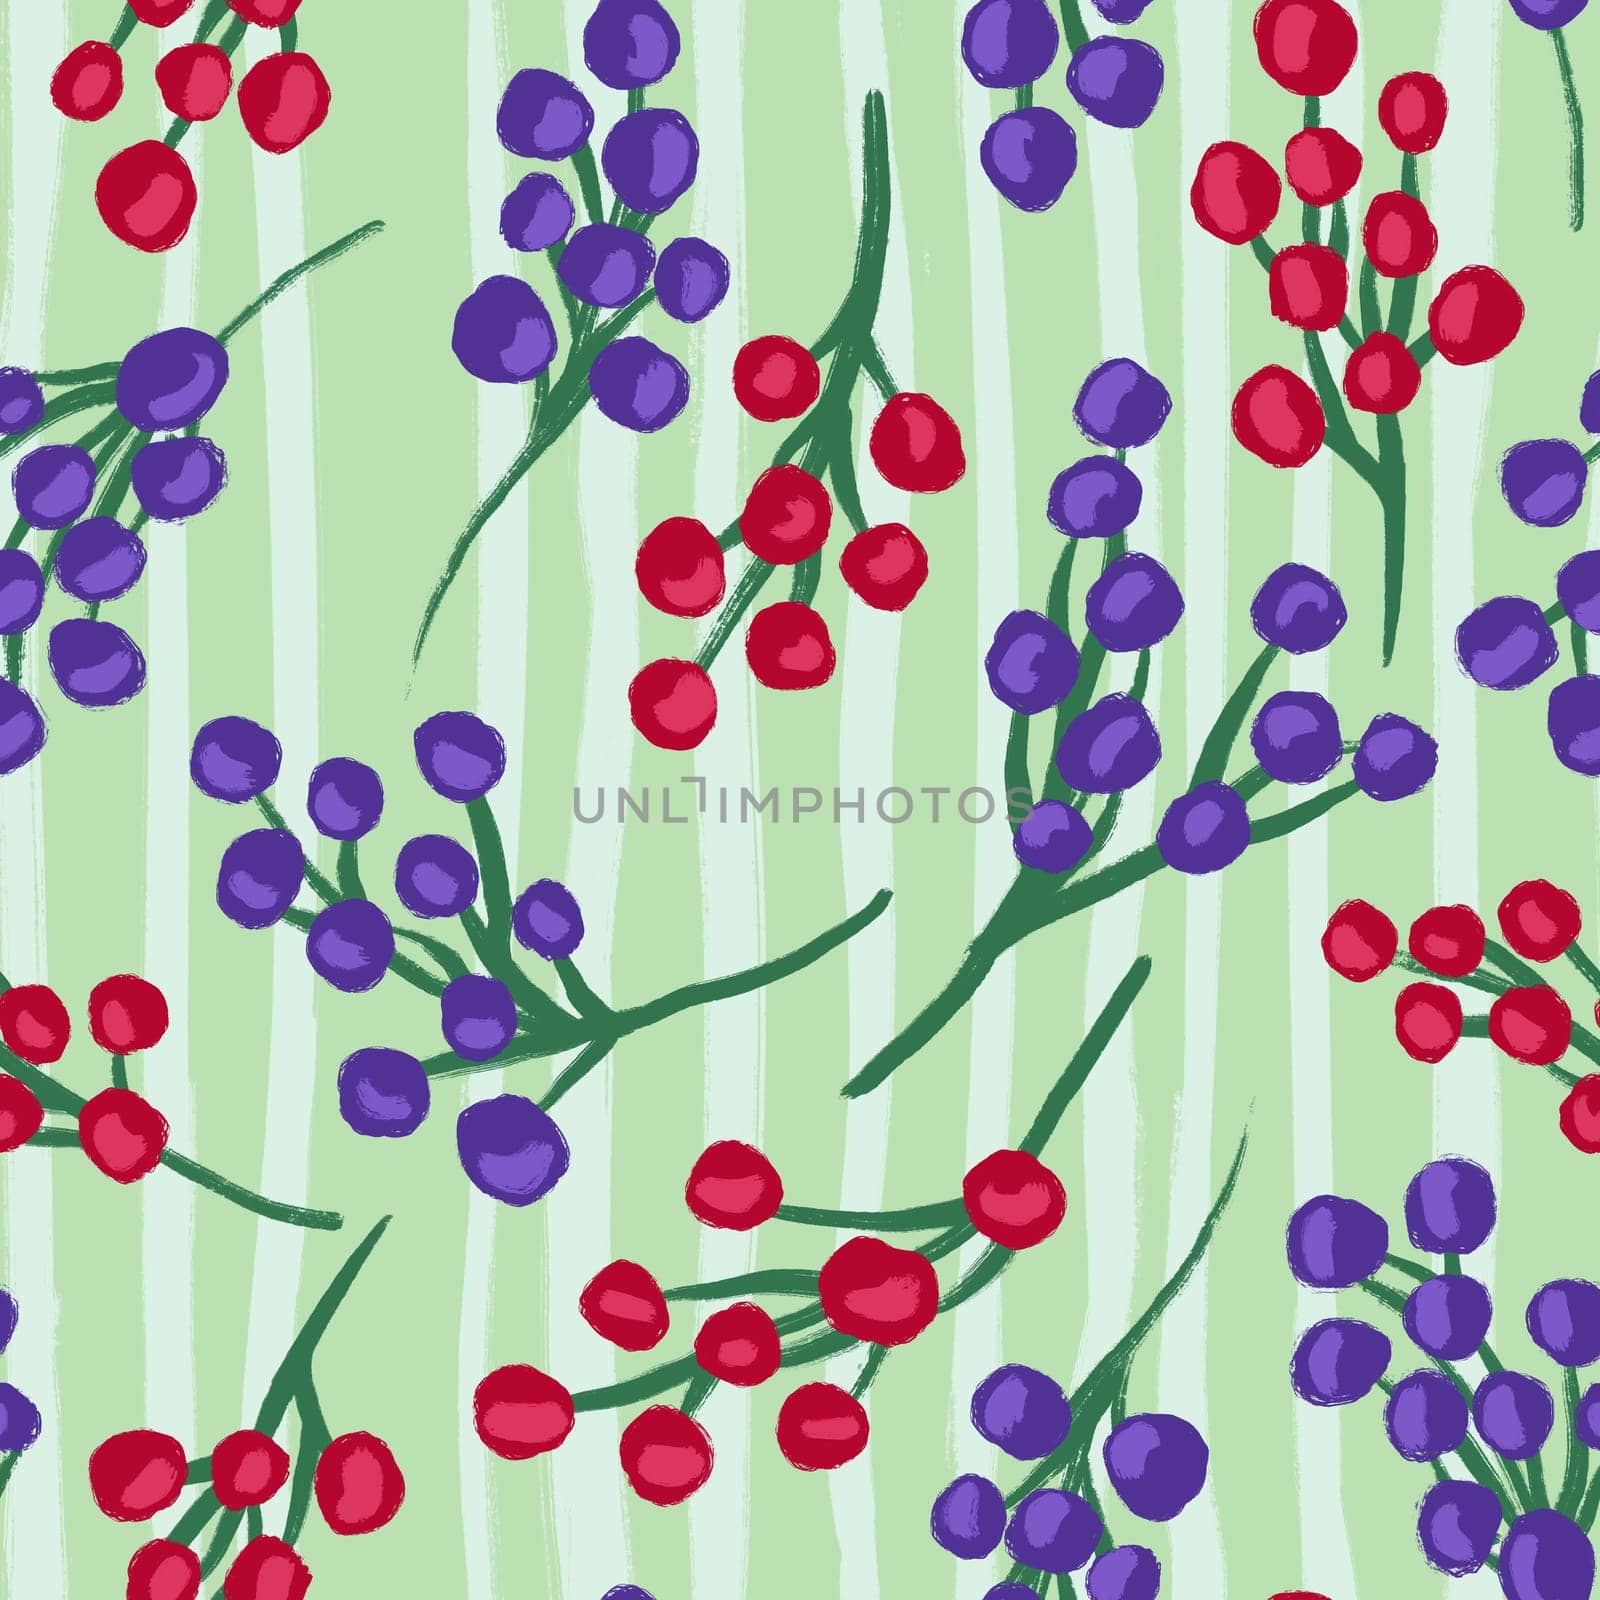 Hand drawn seamless pattern with red black currants berries on green stripes background. Summer berry food on striped pastel print, tasty garden design for kitchen cottagecore fabric wrapping paper textile